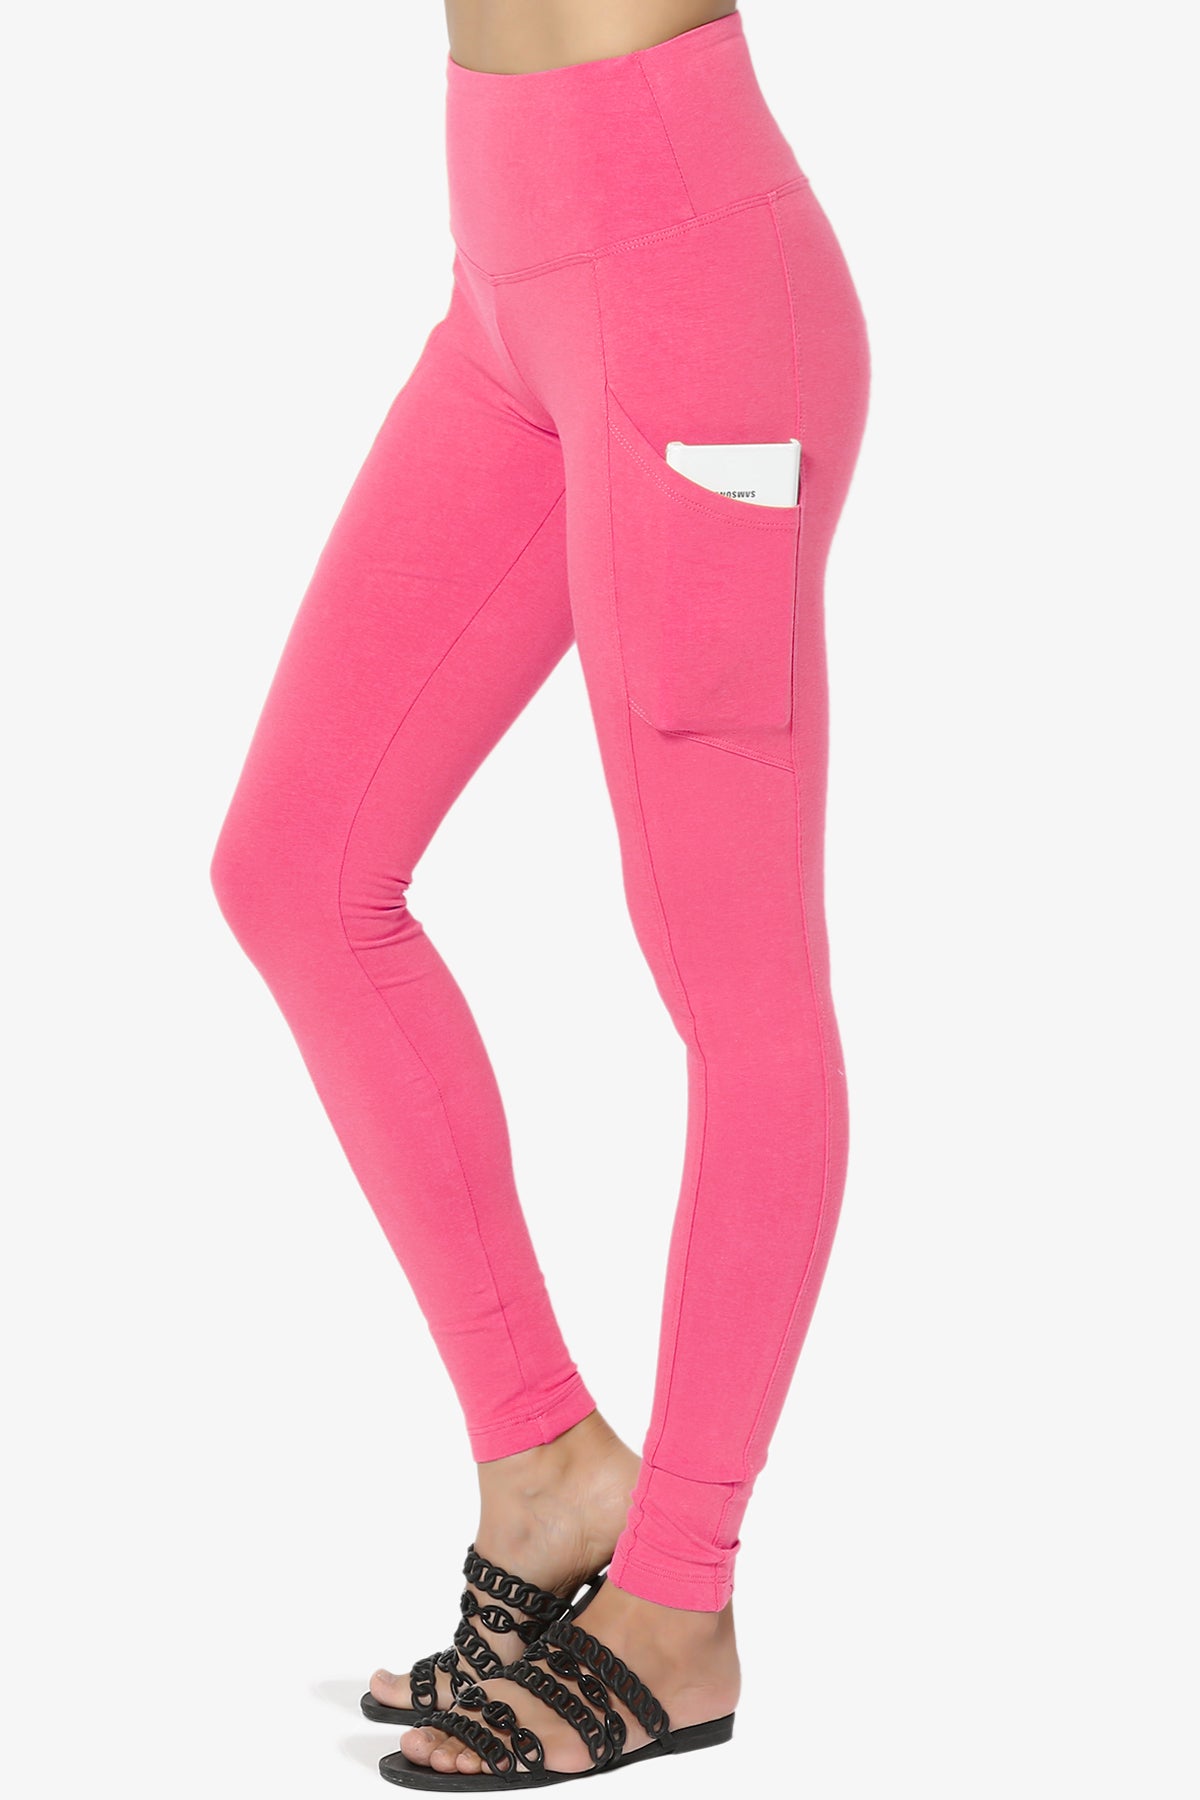 Ansley Luxe Cotton Leggings with Pockets FUCHSIA_1